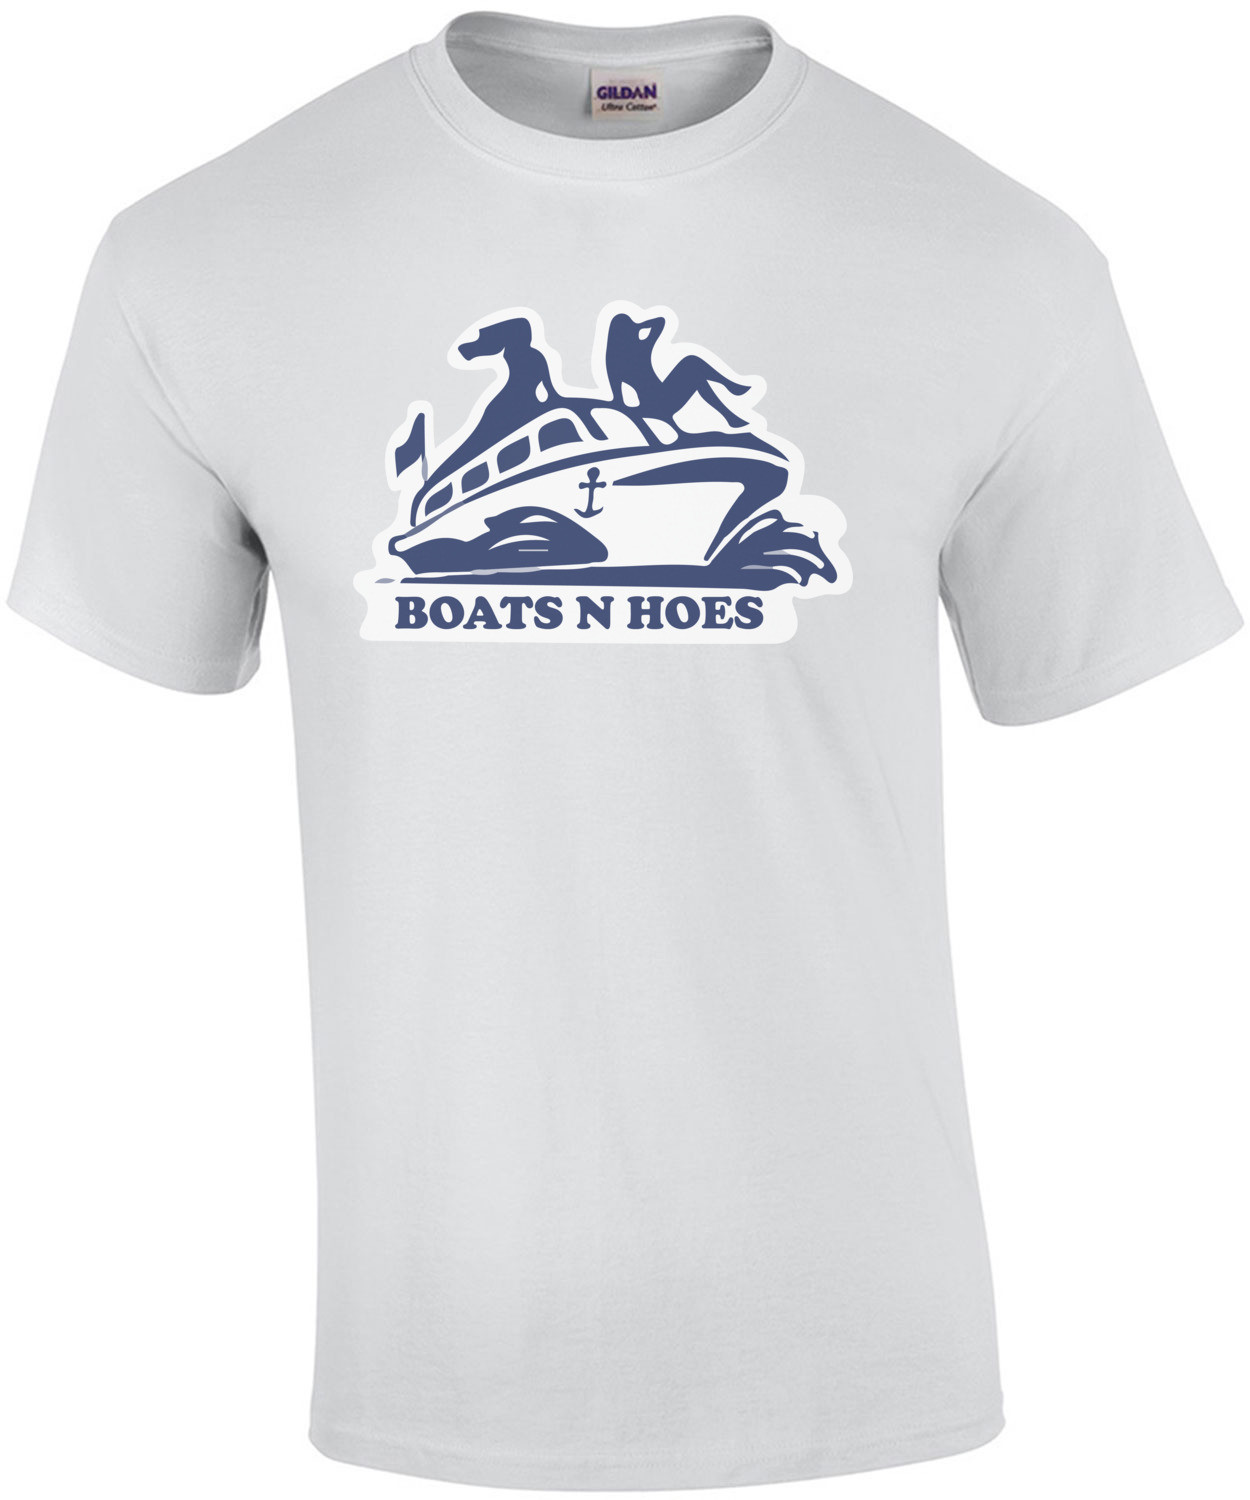 BOATS N HOES - Step Brothers T-Shirt shirt